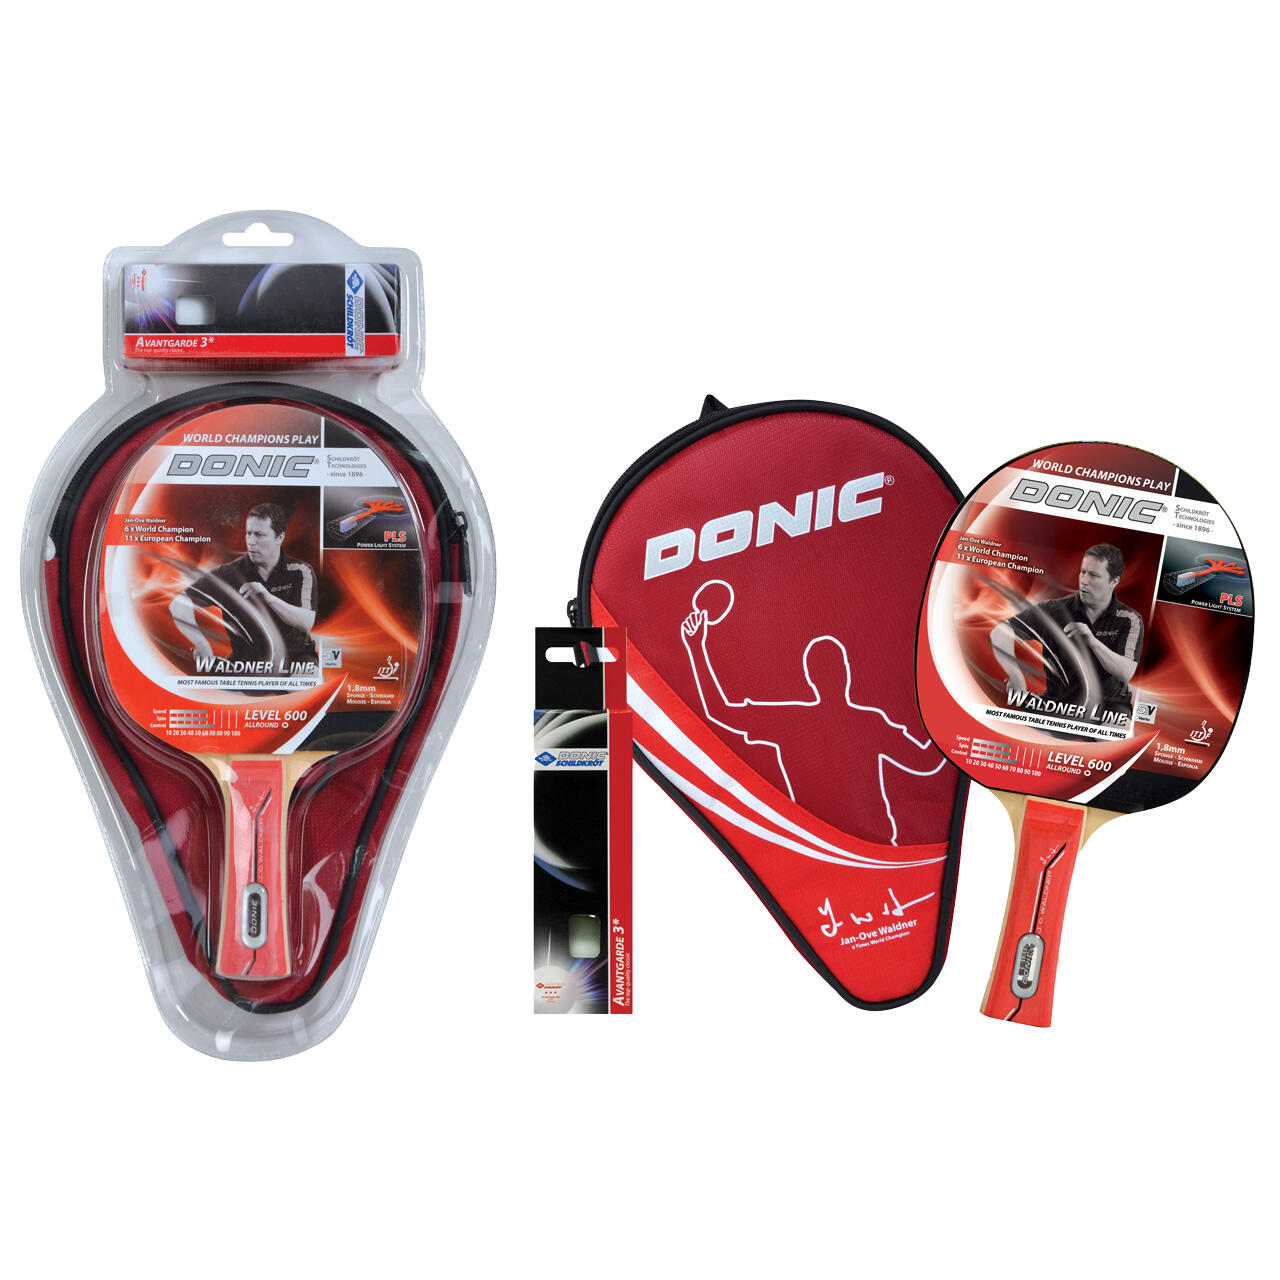 DONIC Donic Waldner 600 Table Tennis Set